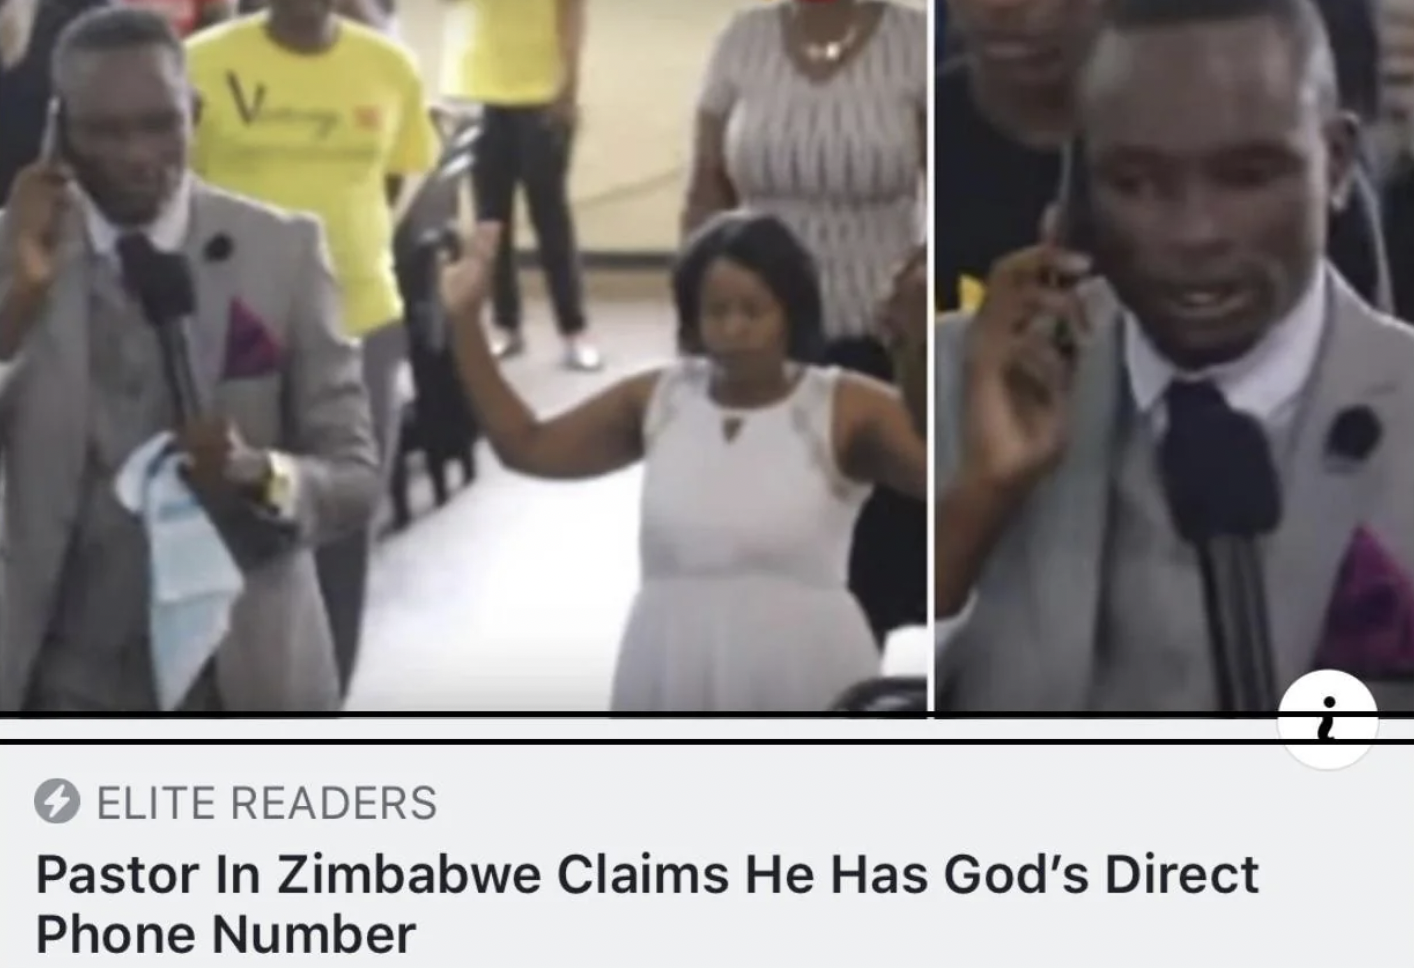 photo caption - Elite Readers Pastor In Zimbabwe Claims He Has God's Direct Phone Number